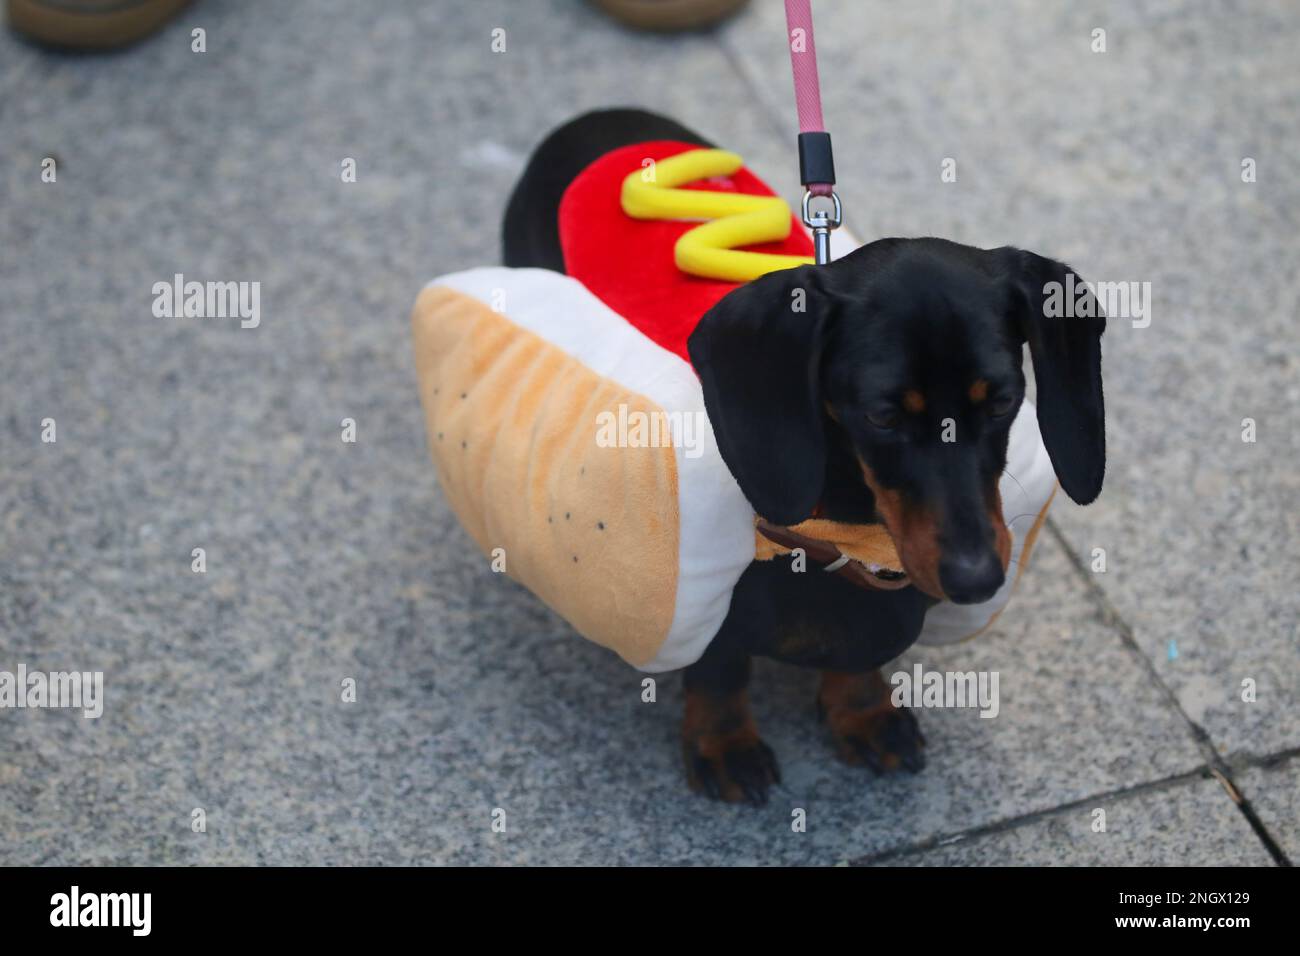 Aviles, Spain, 19th February, 2023: A dog disguised as a Hot-dog during the Antroxaes Pet Contest on February 18, 2023, in Aviles, Spain. Credit: Alberto Brevers / Alamy Live News Stock Photo